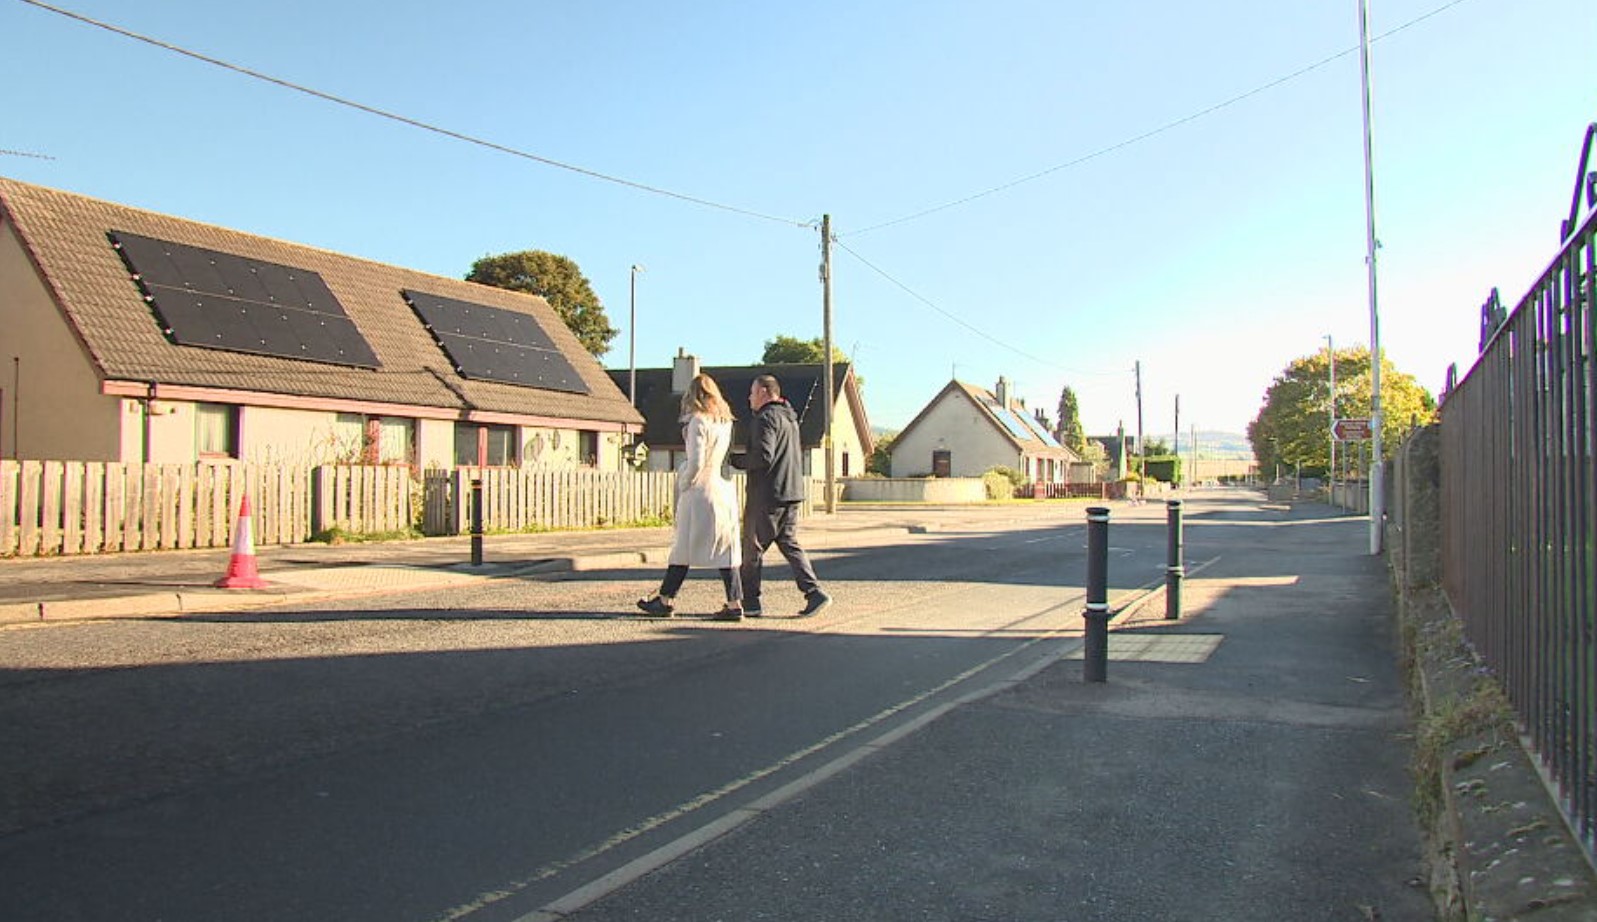 Duncan said a pedestrian crossing could encourage vehicles to slow down